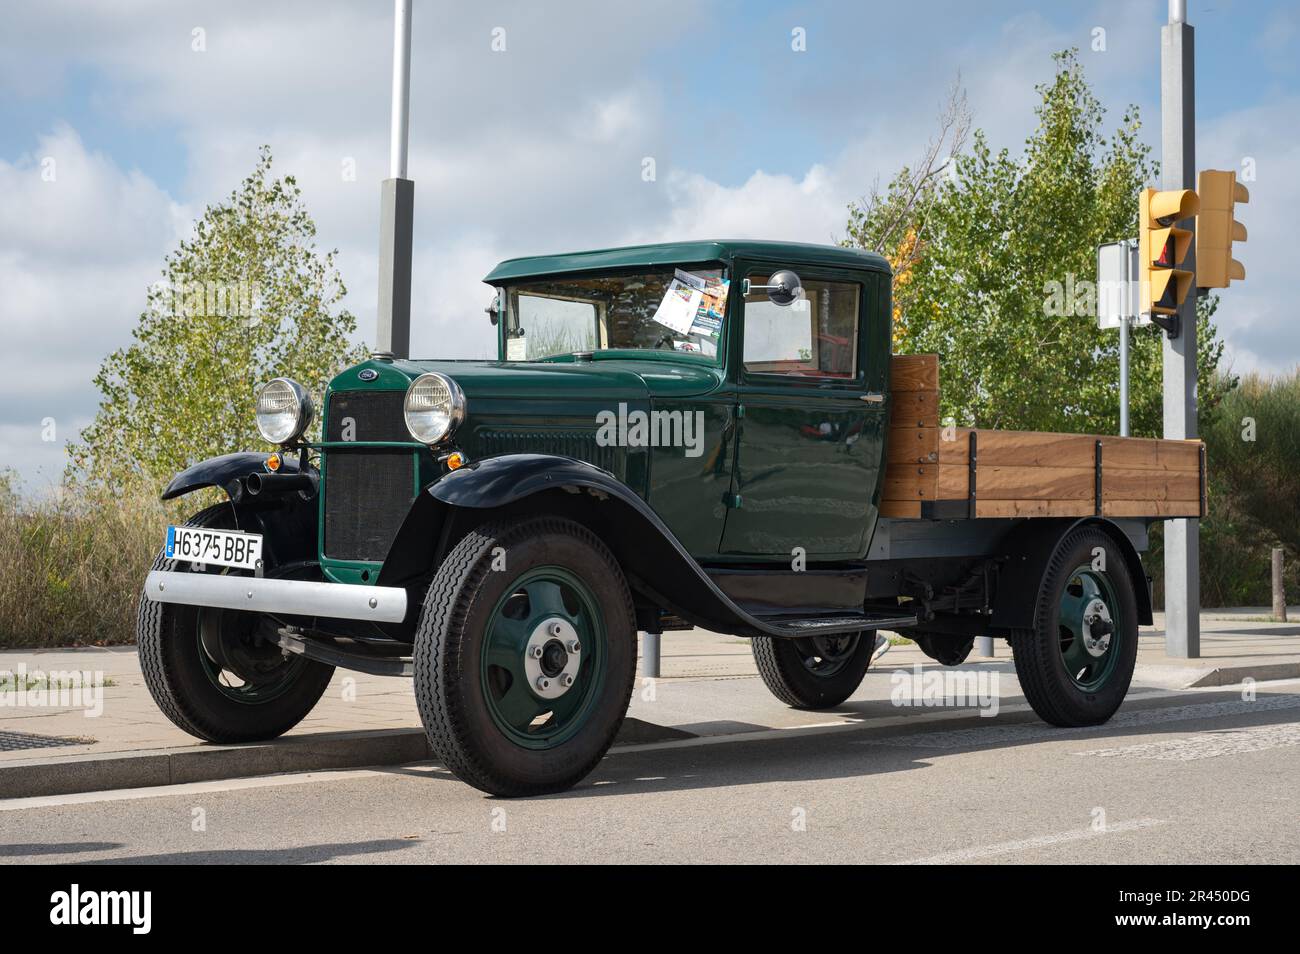 Front view of the classic historic Ford Model AA truck in green color Stock Photo